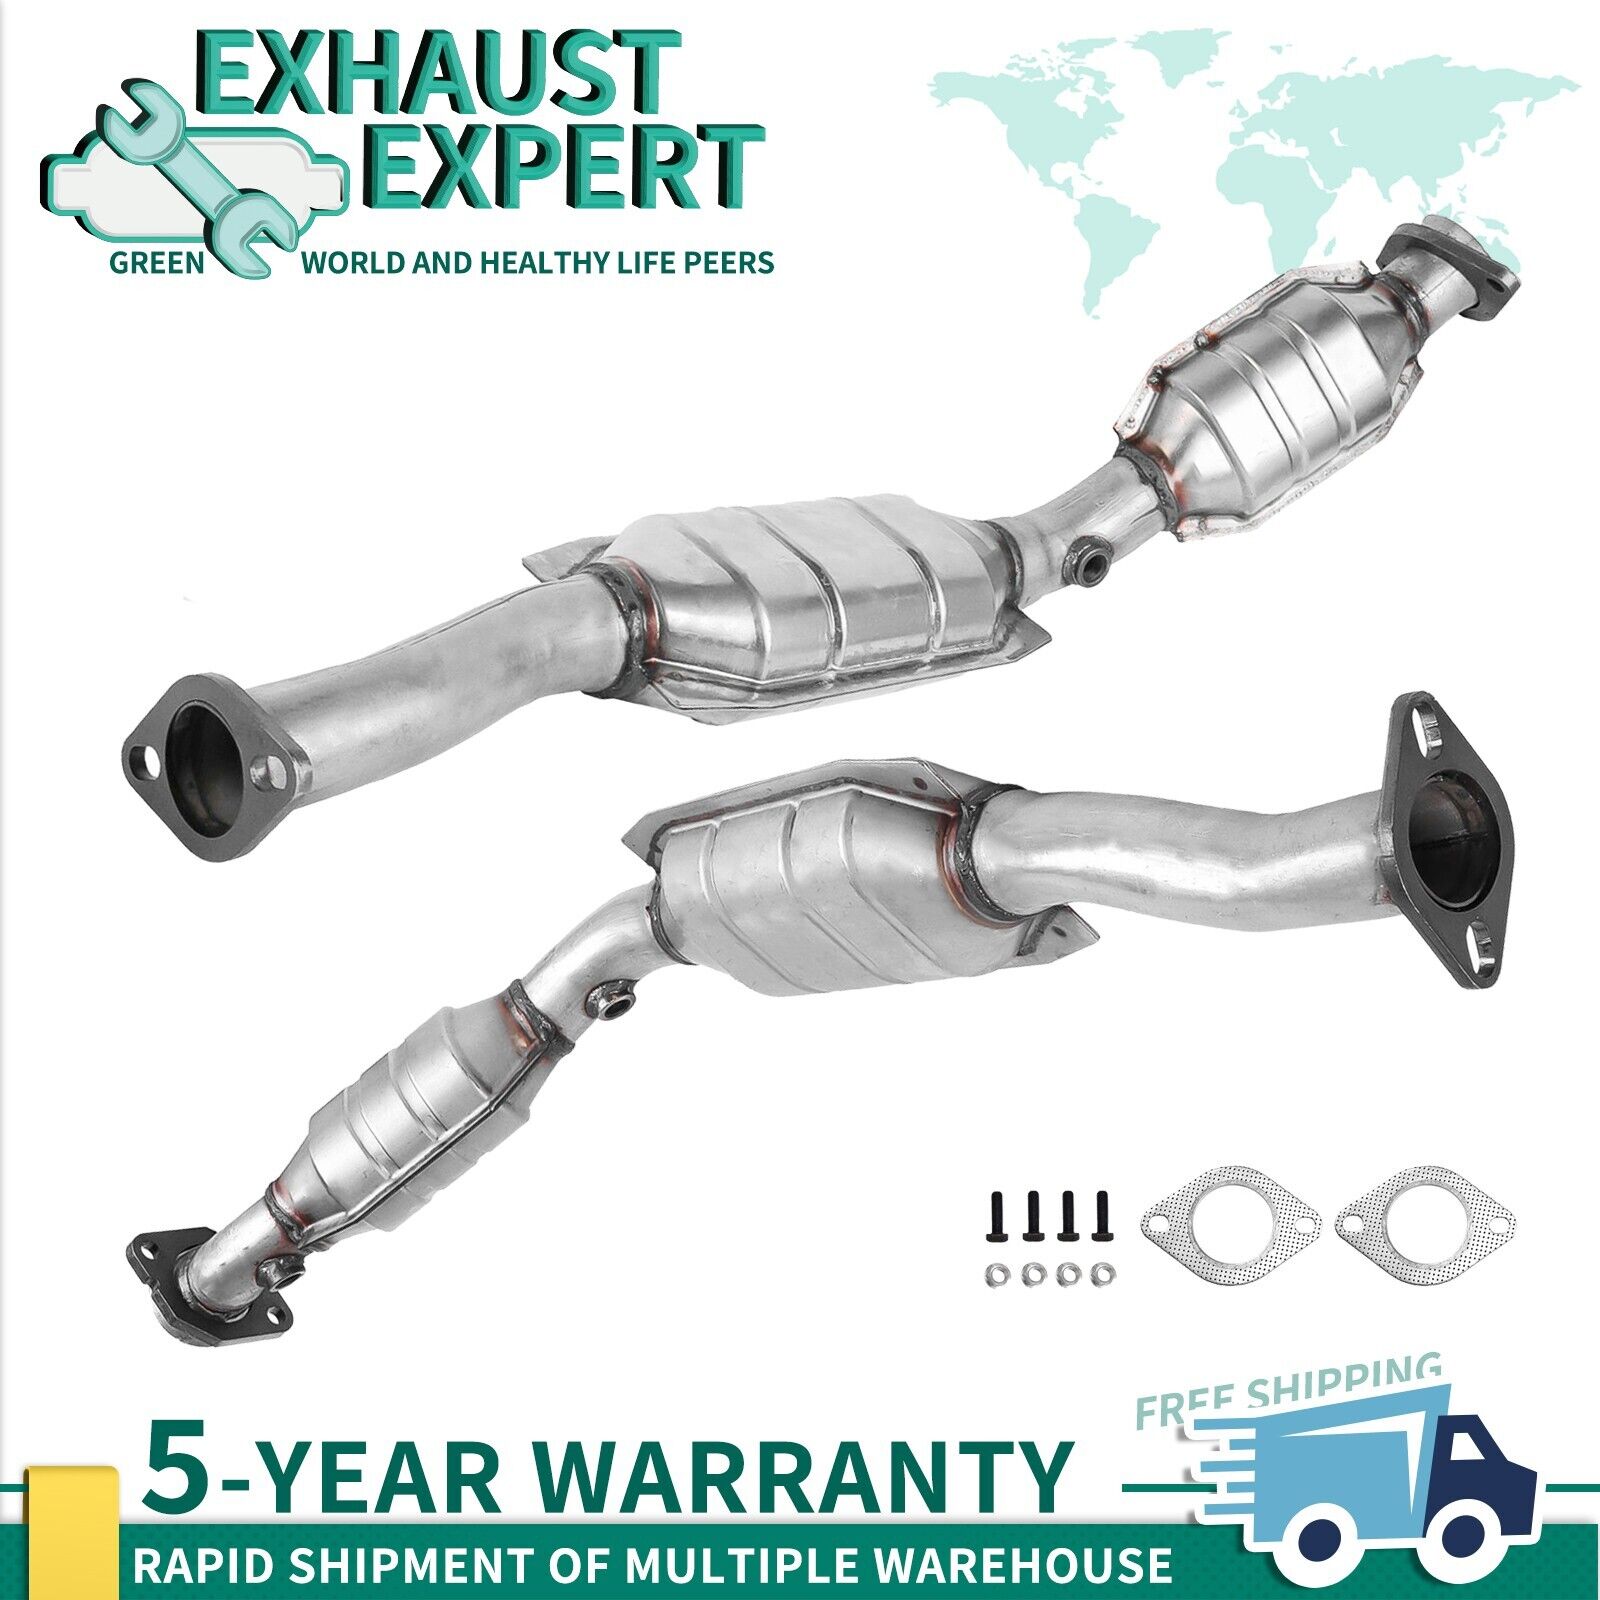 Catalytic Converter For Ford Crown Victoria Mercury Grand Marquis Left+Right